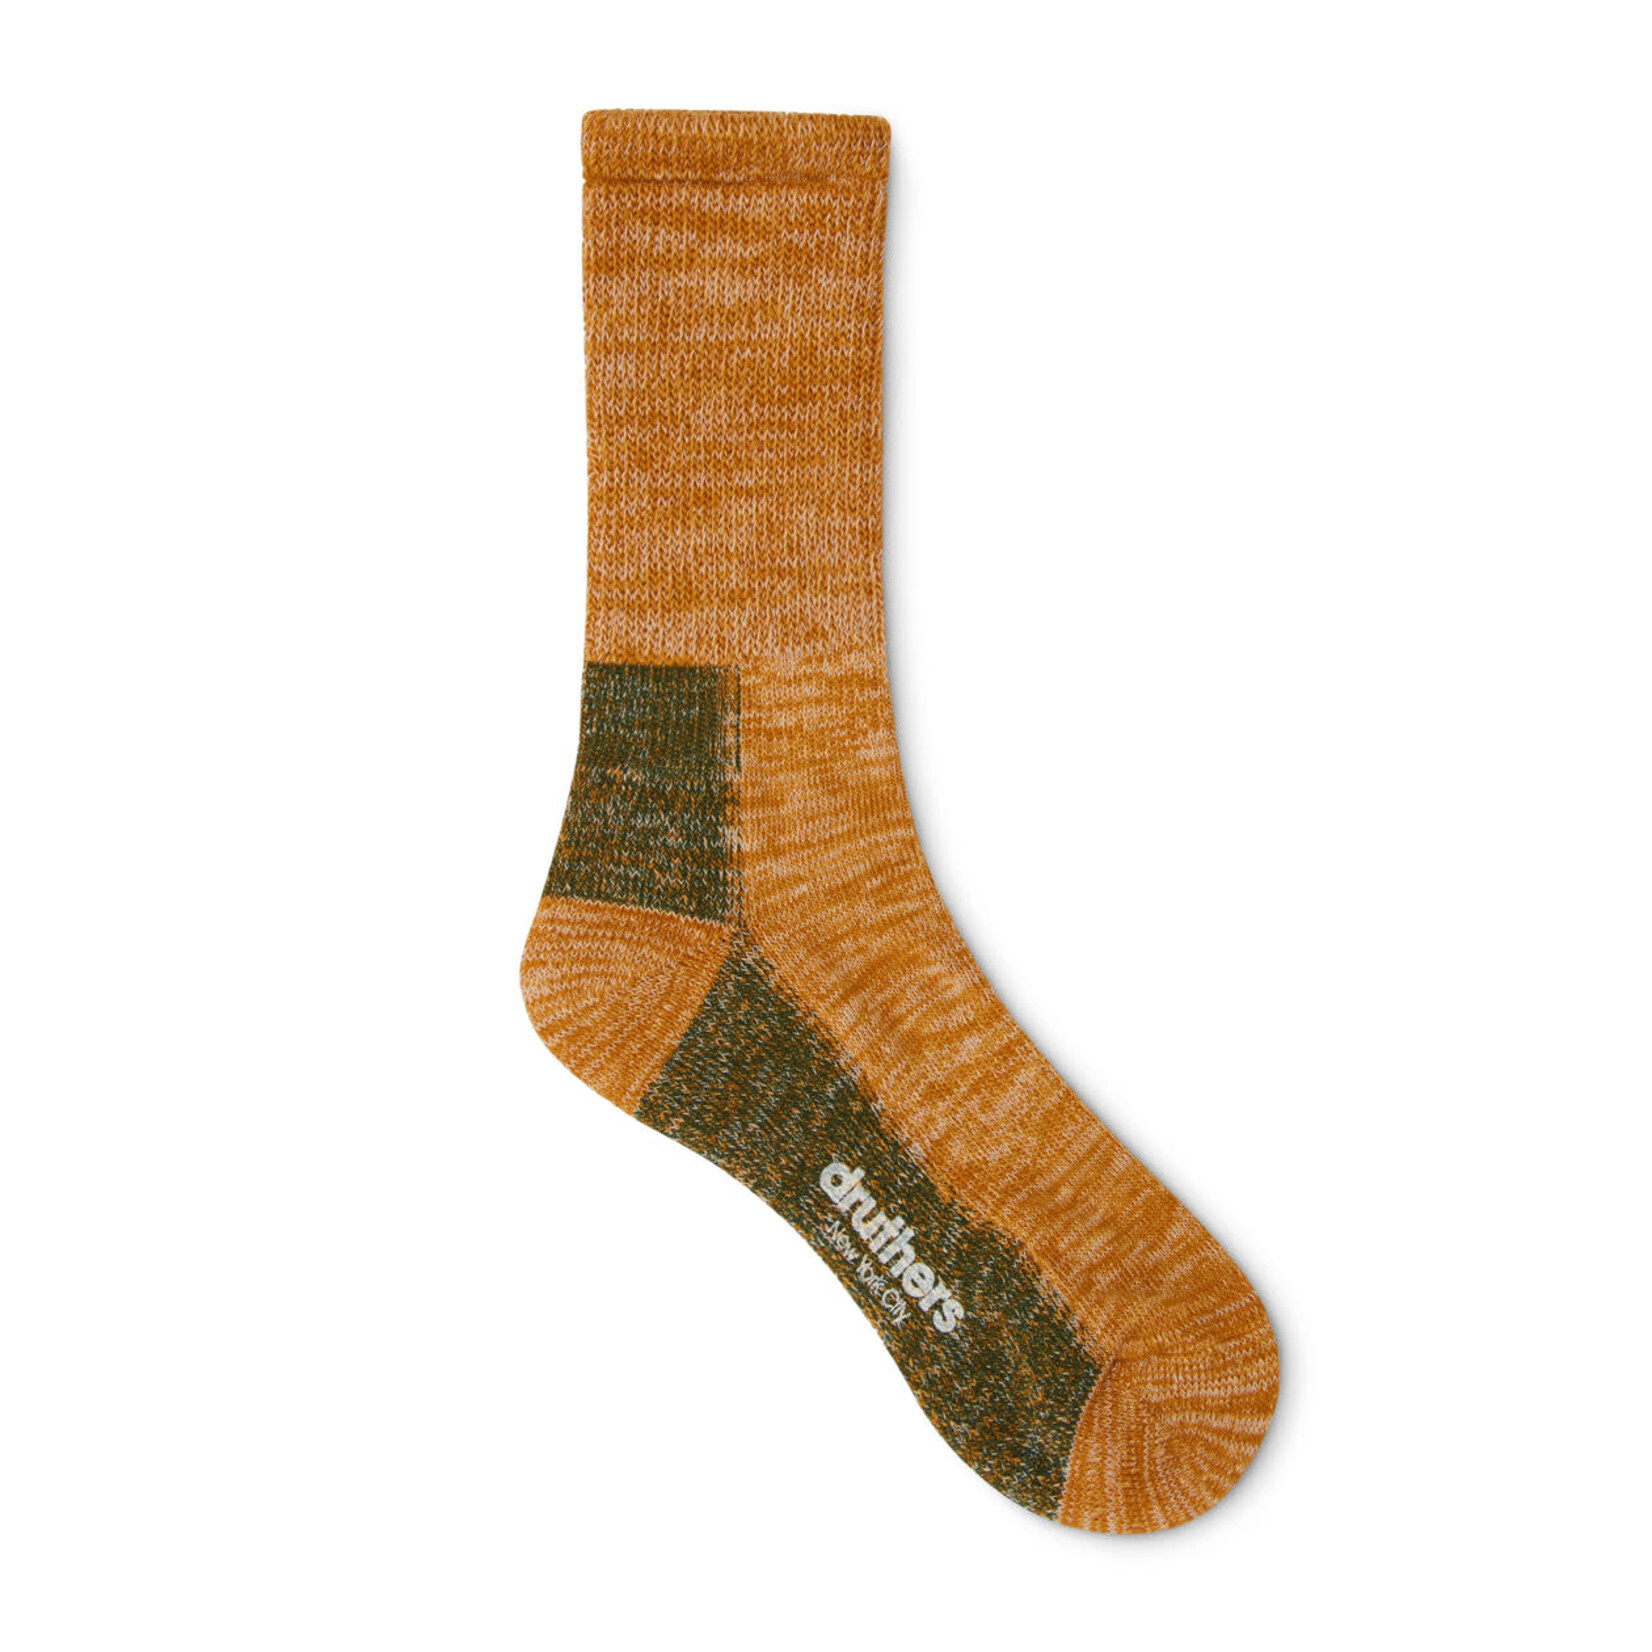 Druthers NYC Druthers Organic Cotton Defender Boot Sock - Turmeric Mélange